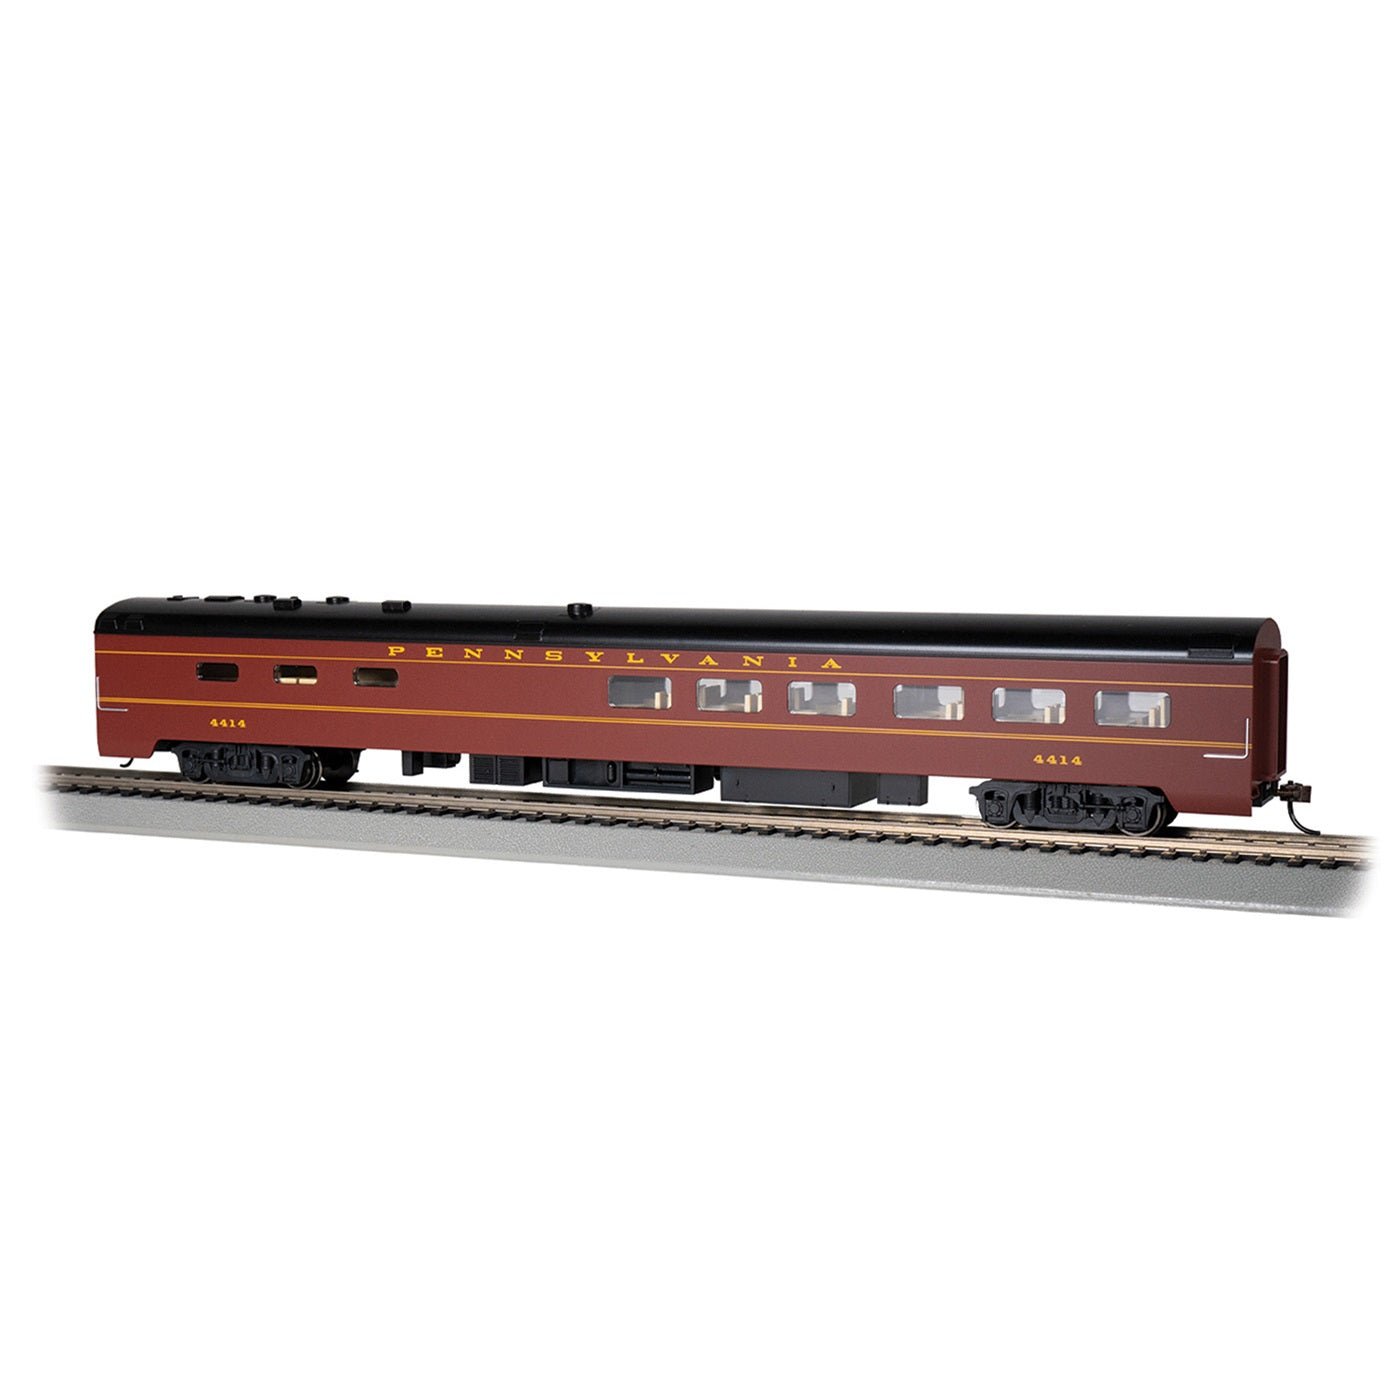 Bachmann 85' Smooth - Side Dining Car with Lighted Interior PRR #4414, HO Scale - Micro - Mark Model Trains, Rolling Stock, Z